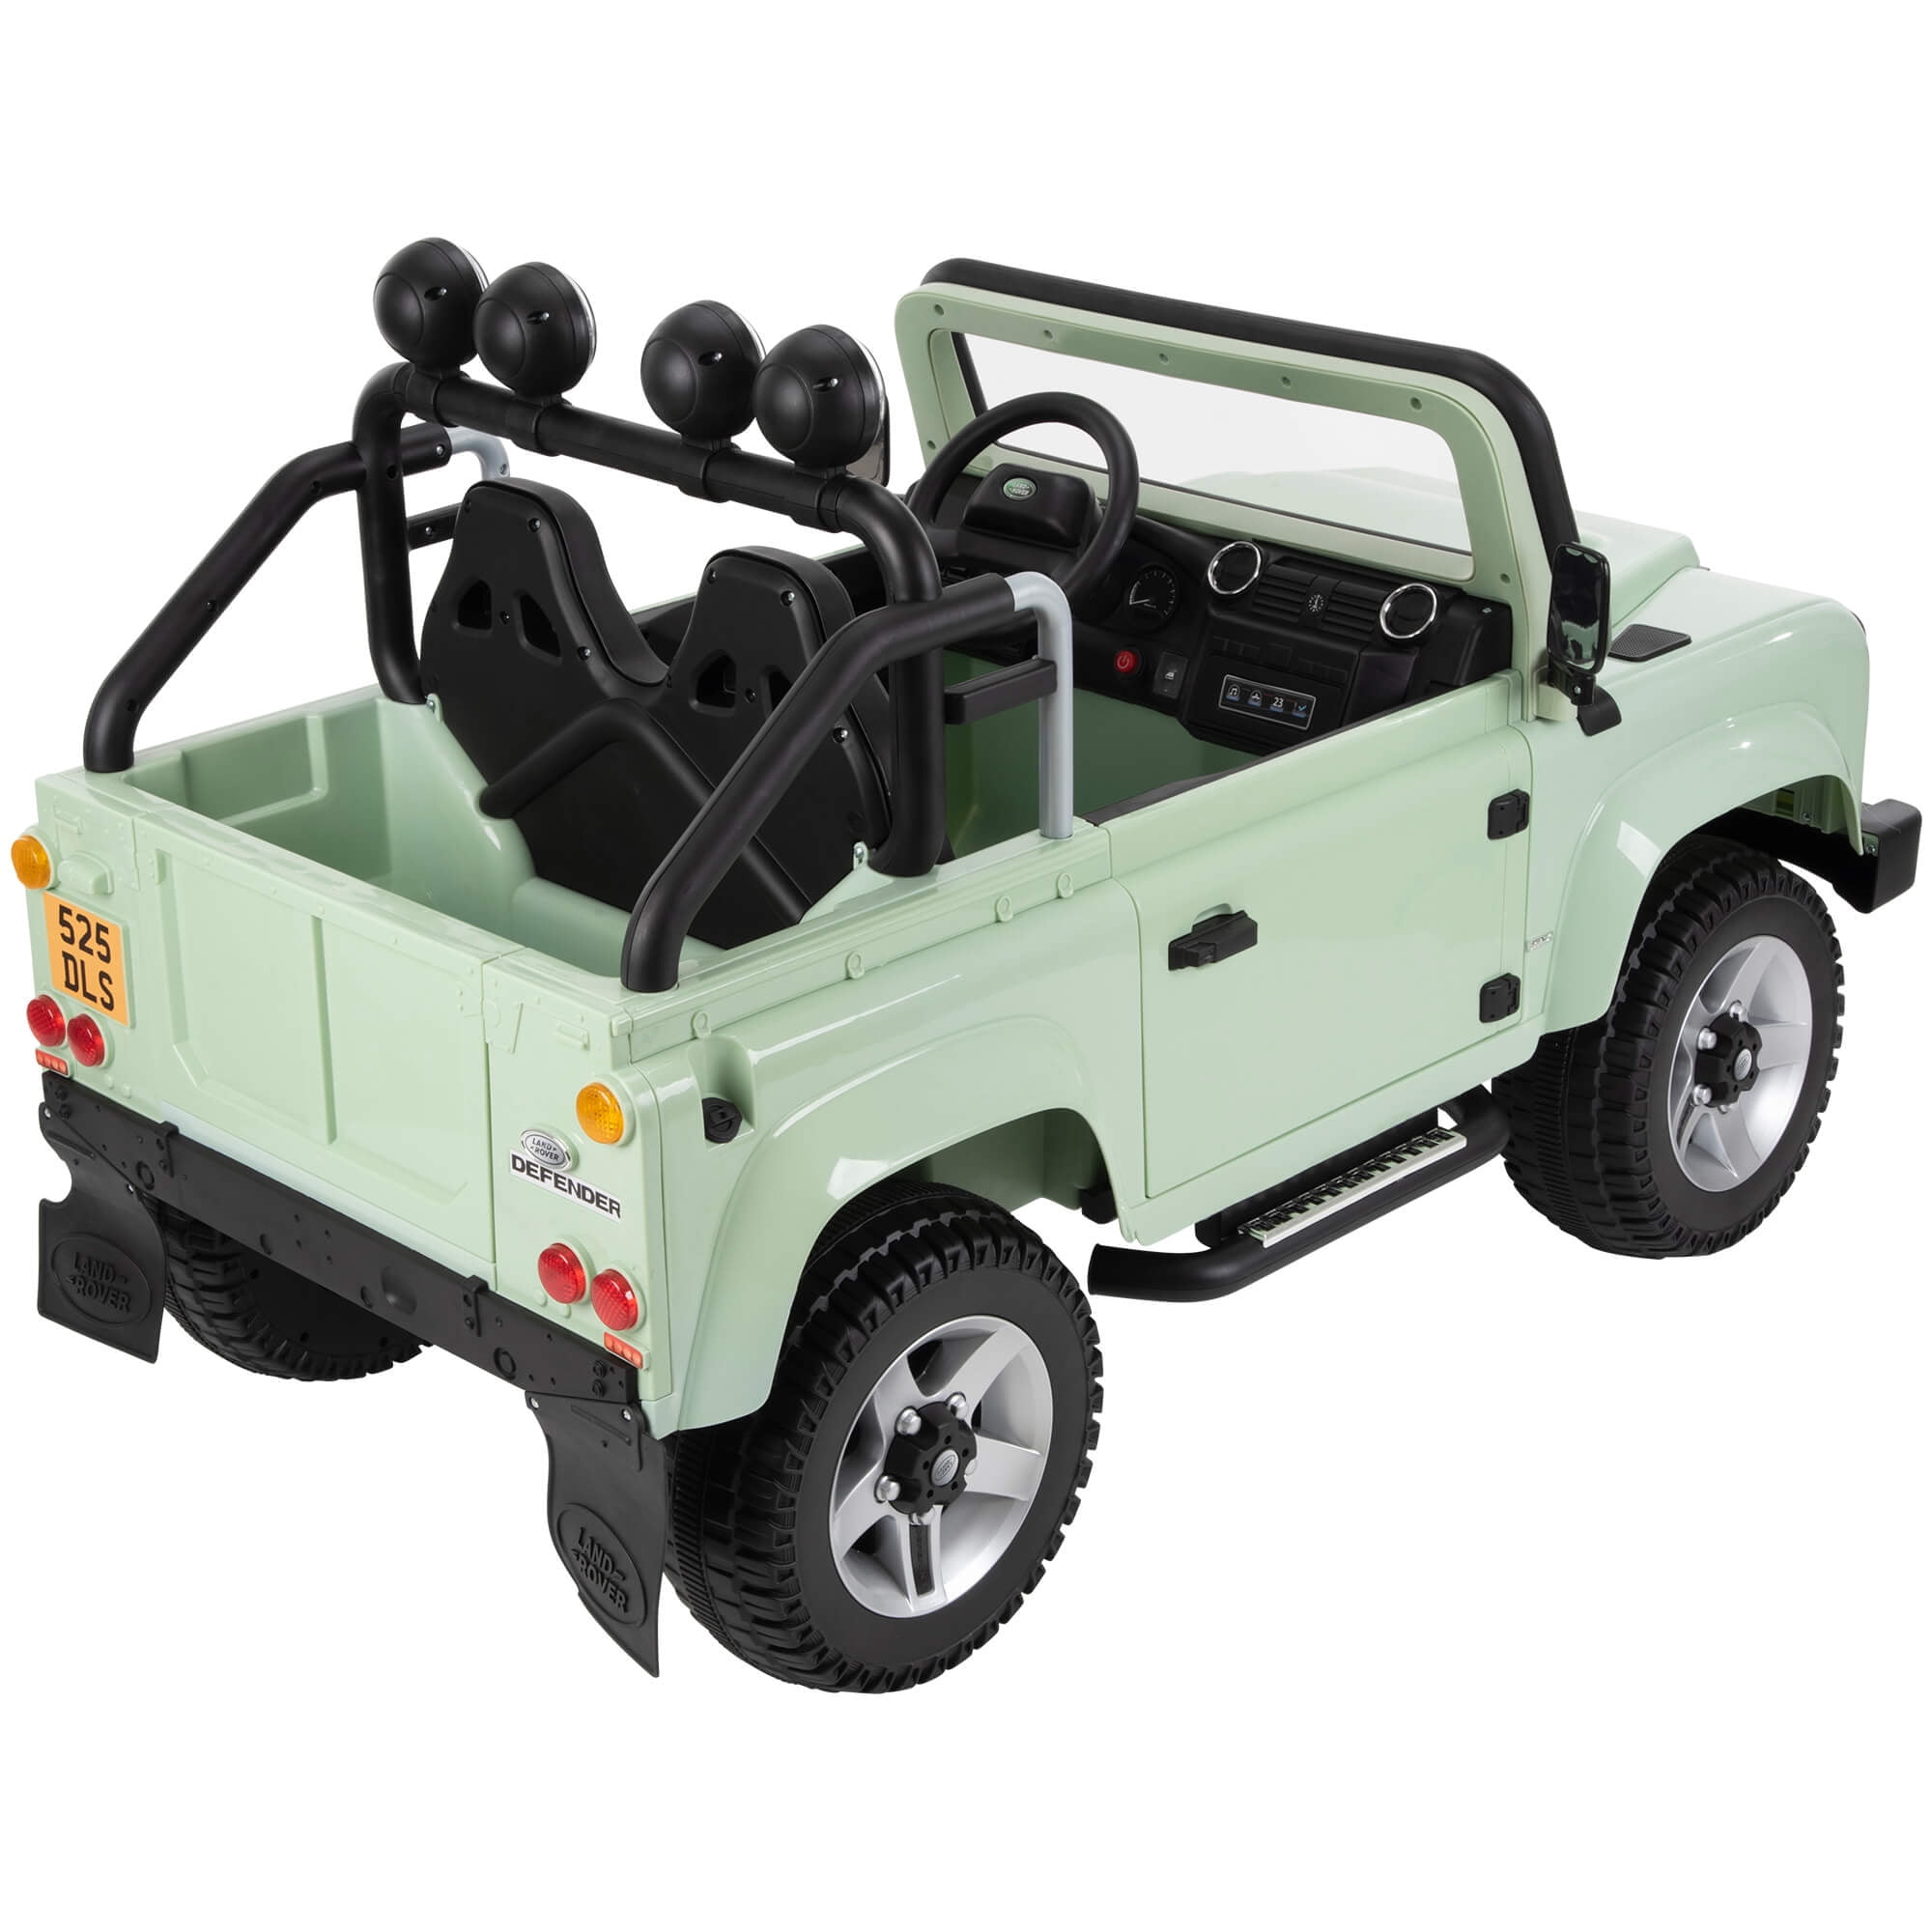 battery powered land rover